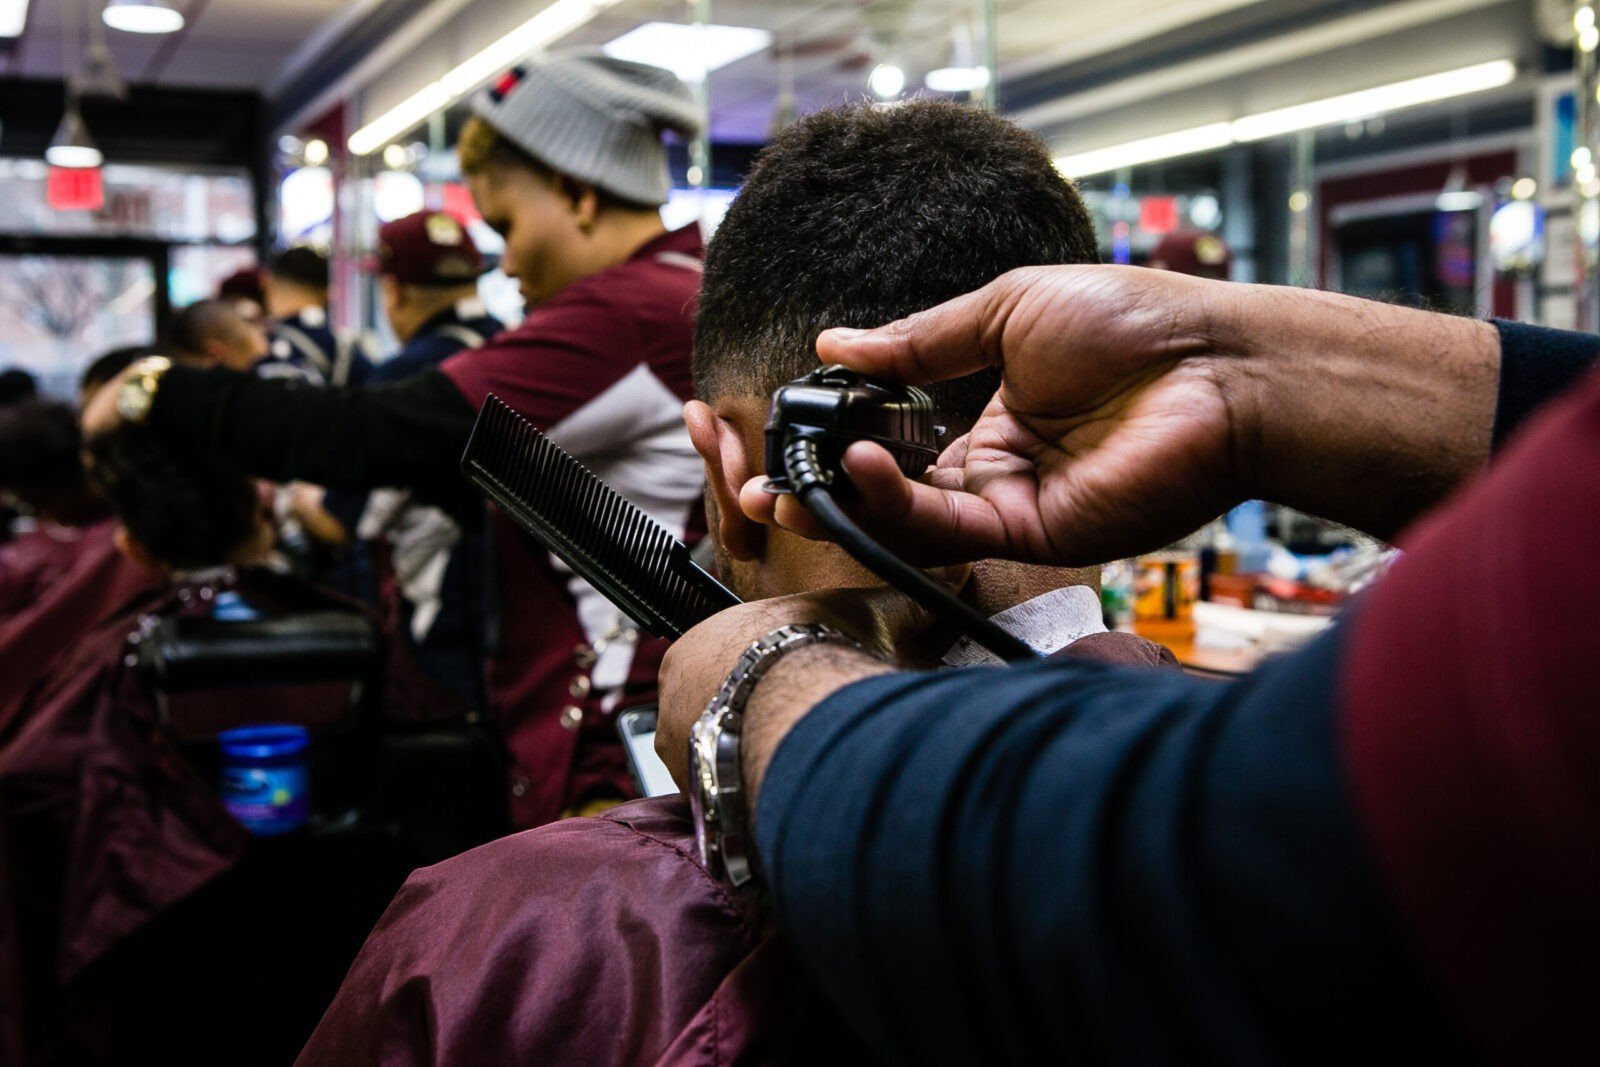 Close up of a customer  getting their hair cut. The barber is using clippers and a plastic comb. Their reflection can be seen in the mirror.  